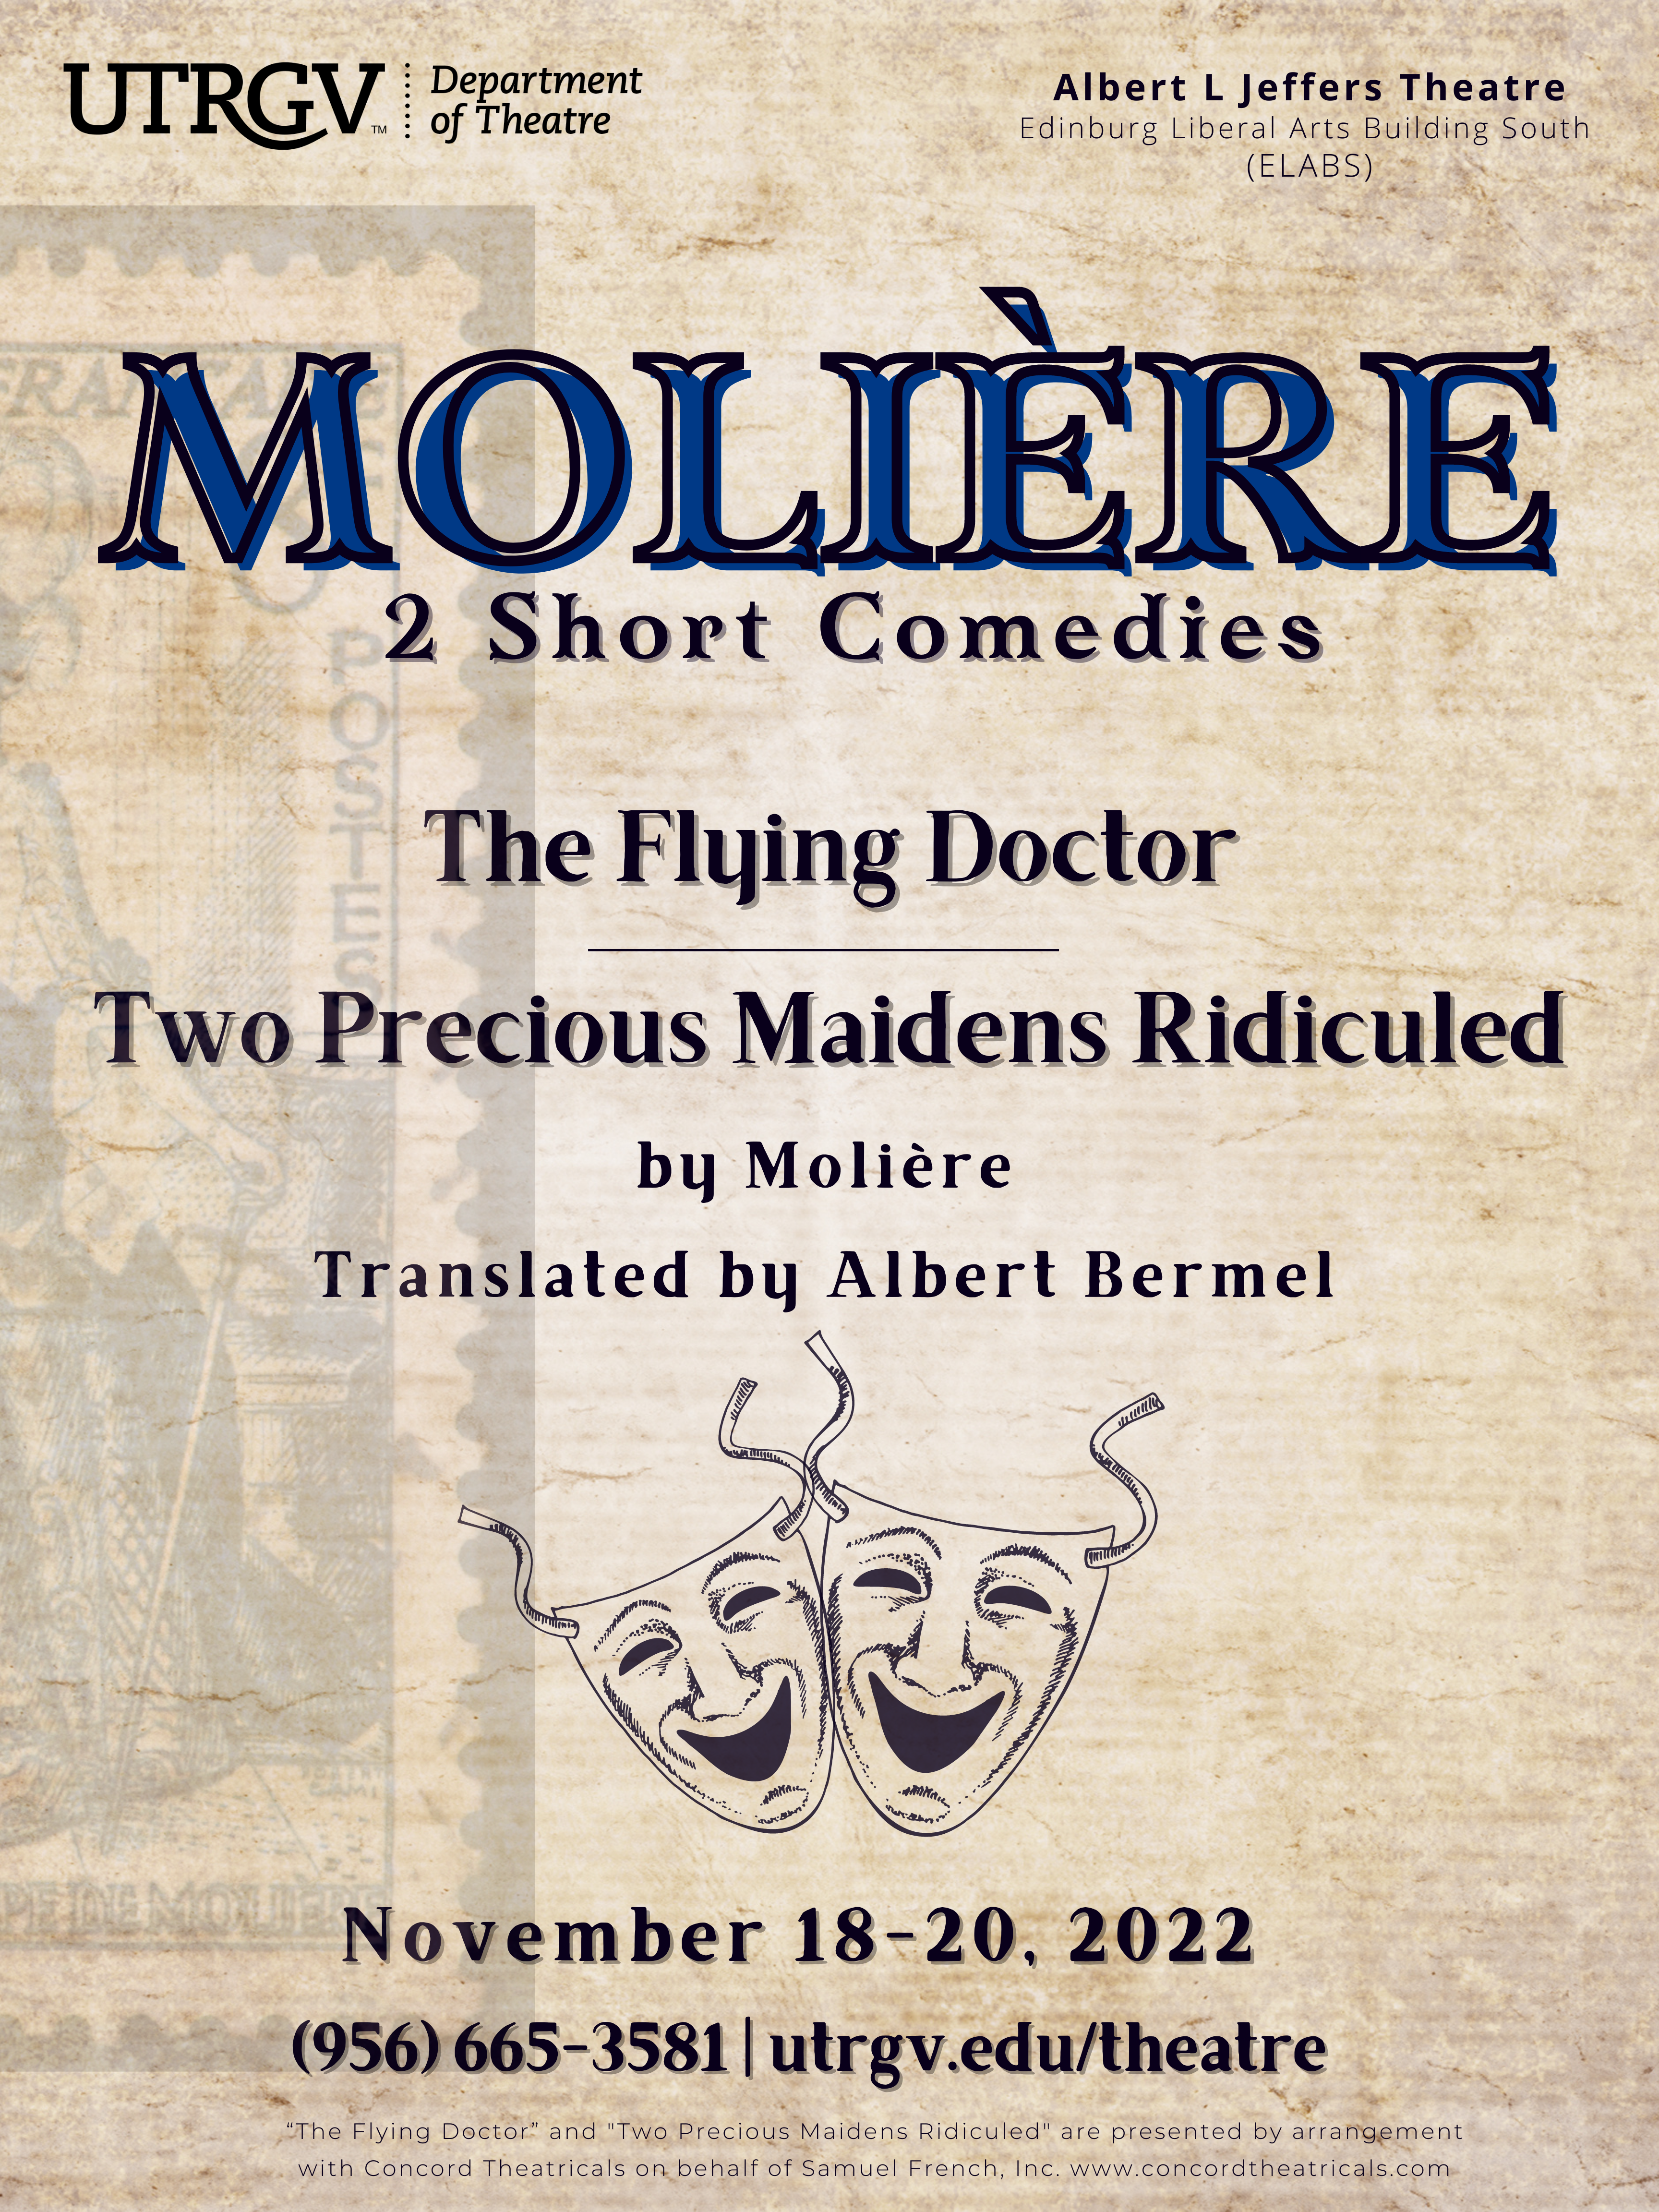 After 25 years, Moliere comes back to UTRGV